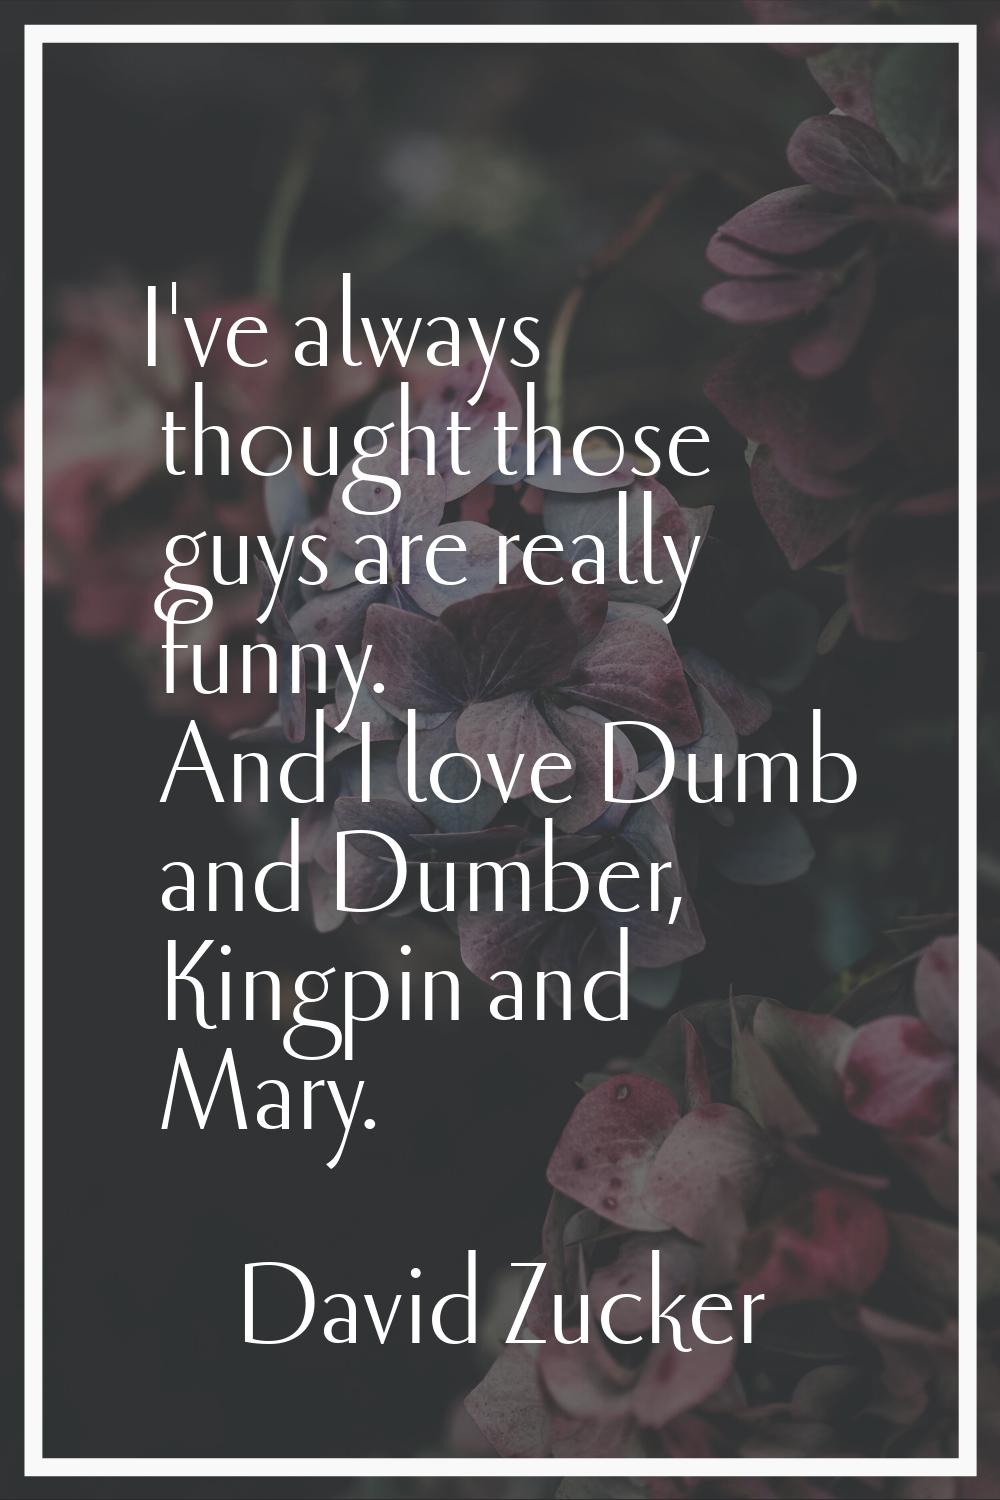 I've always thought those guys are really funny. And I love Dumb and Dumber, Kingpin and Mary.